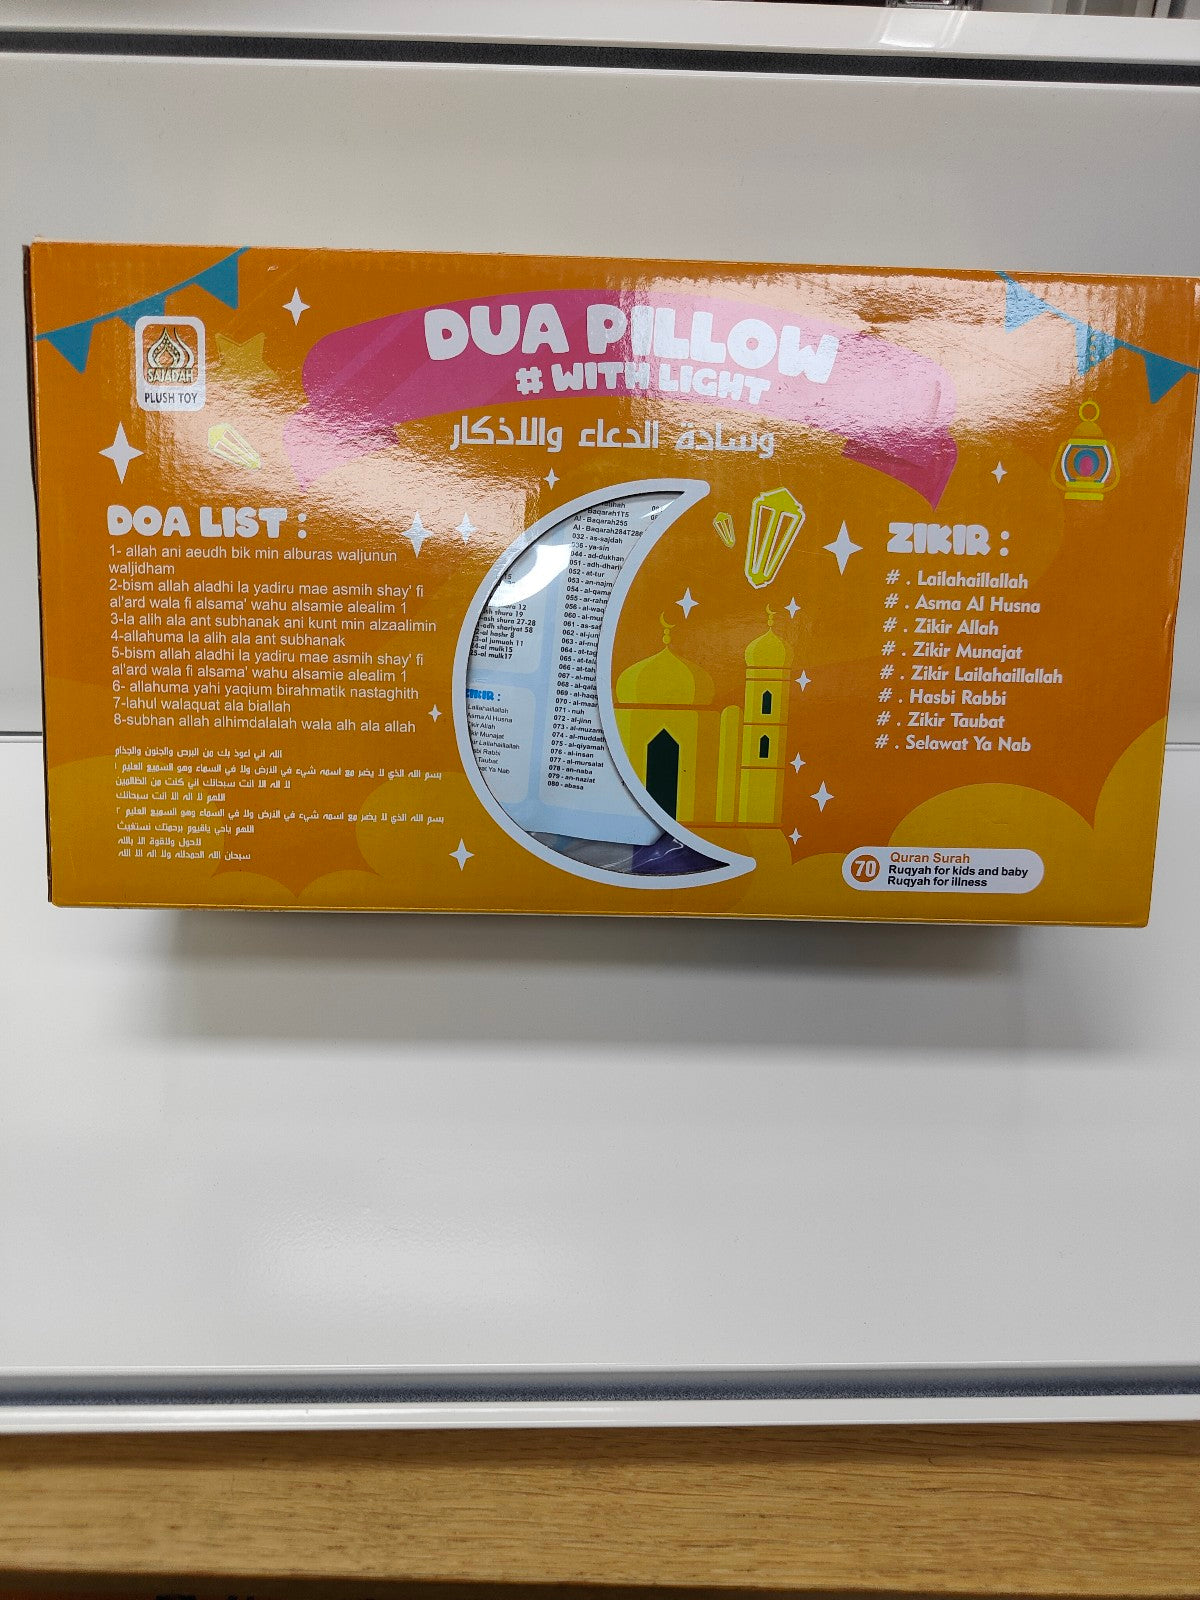 Explore the DUA Pillow from Hikmah Boutique. A perfect Islamic Gift Toy, Islamic Dua Pillow is a Prayer Companion that has Quranic Verses, Arabic Duas, Zikr and Allah's Names. Perfect for Islamic Gifts, Education, Protection, and Spiritual Comfort.